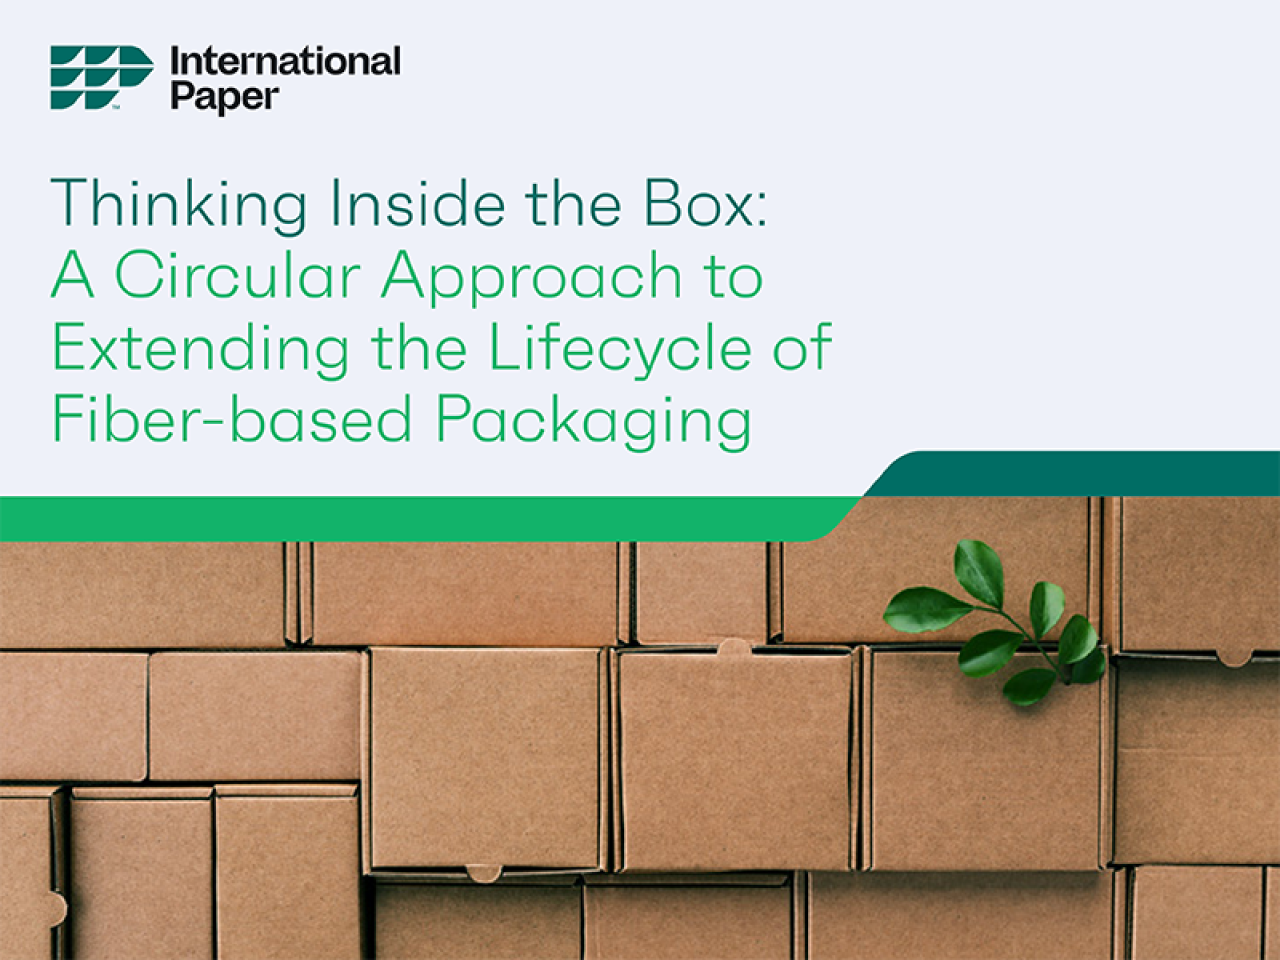 "Thinking Inside the Box: A Circular Approach to Extending the Lifecycle of Fiber-based Packaging"